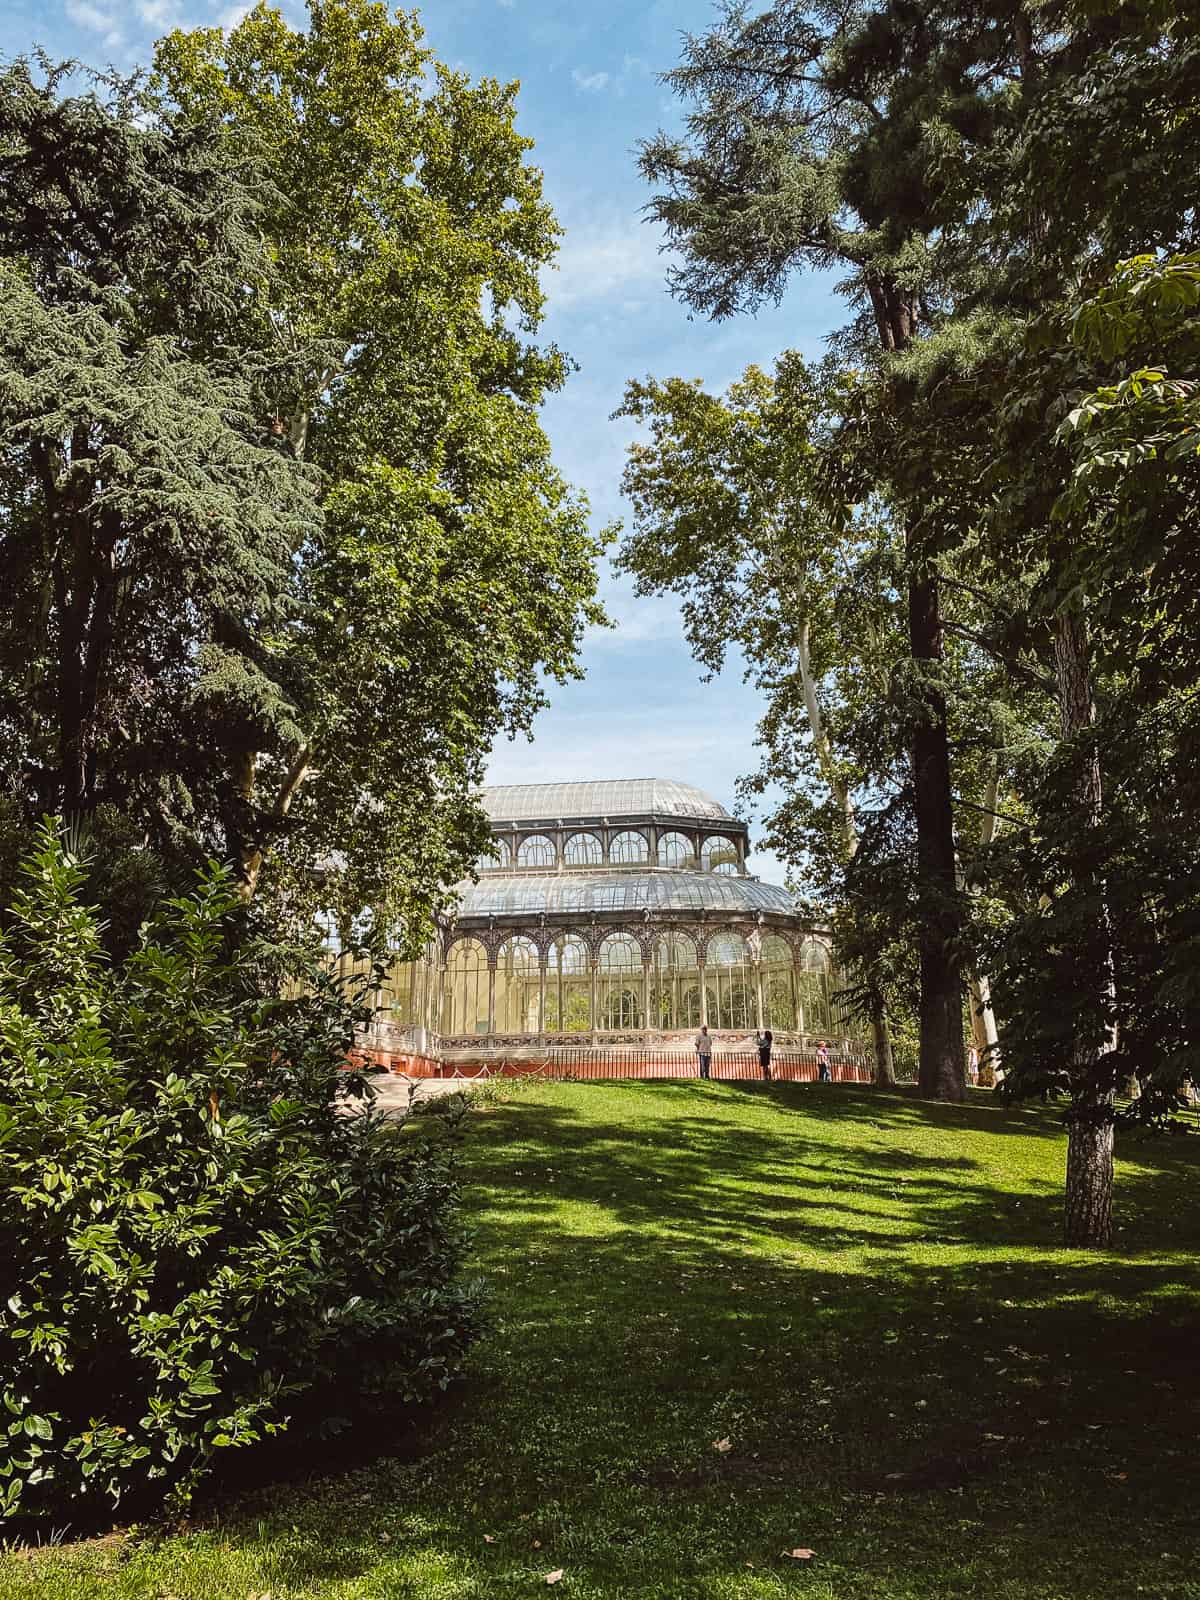 A crystal palace inside a beautiful green park in Madrid